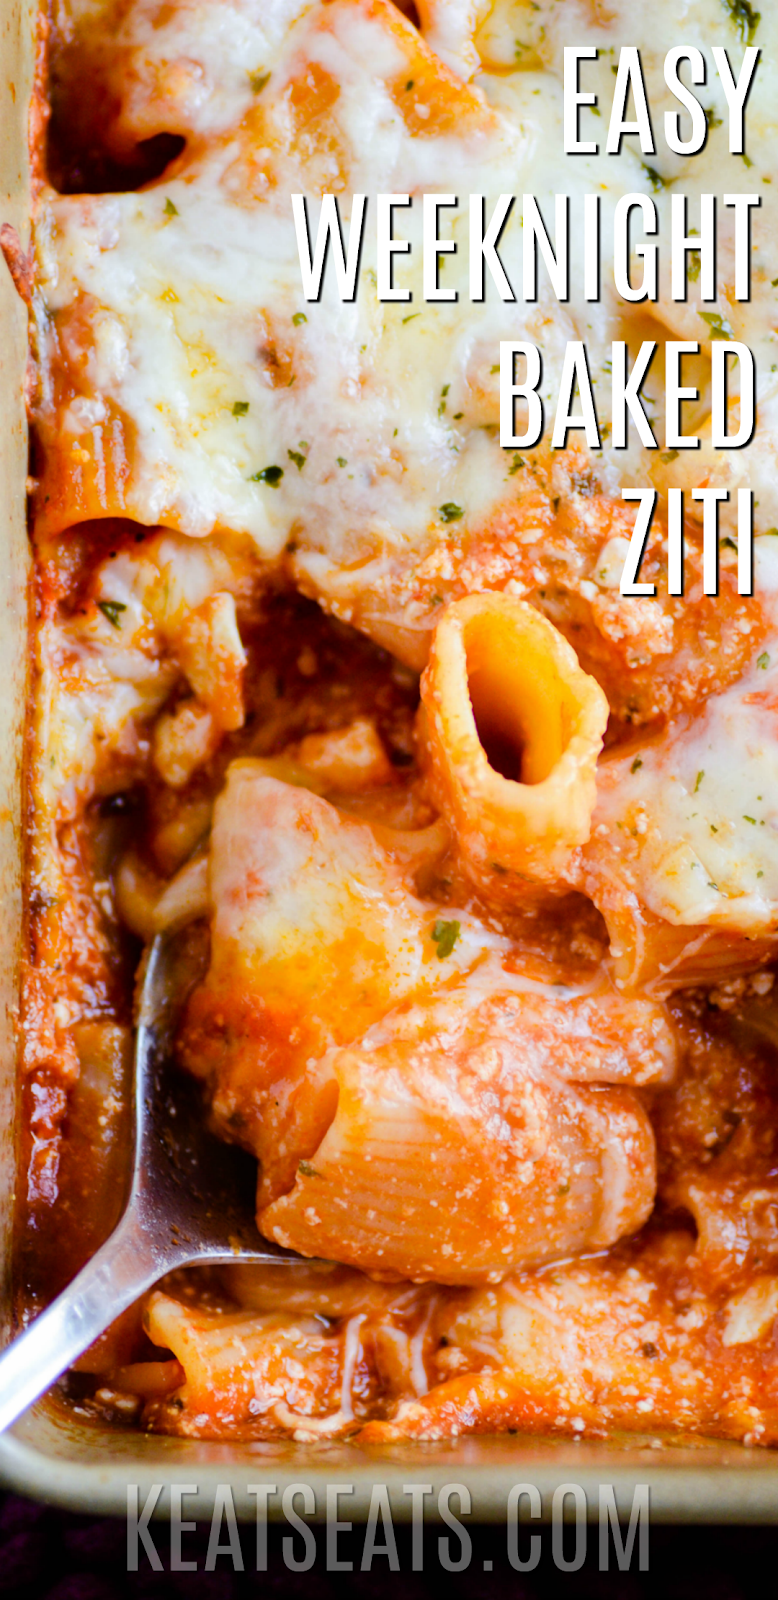 This recipe for baked ziti has become one of my family's very favorite weeknight dinners! I love it because it's so quick and easy to make, and my family loves it because it's so cheesy and delicious.